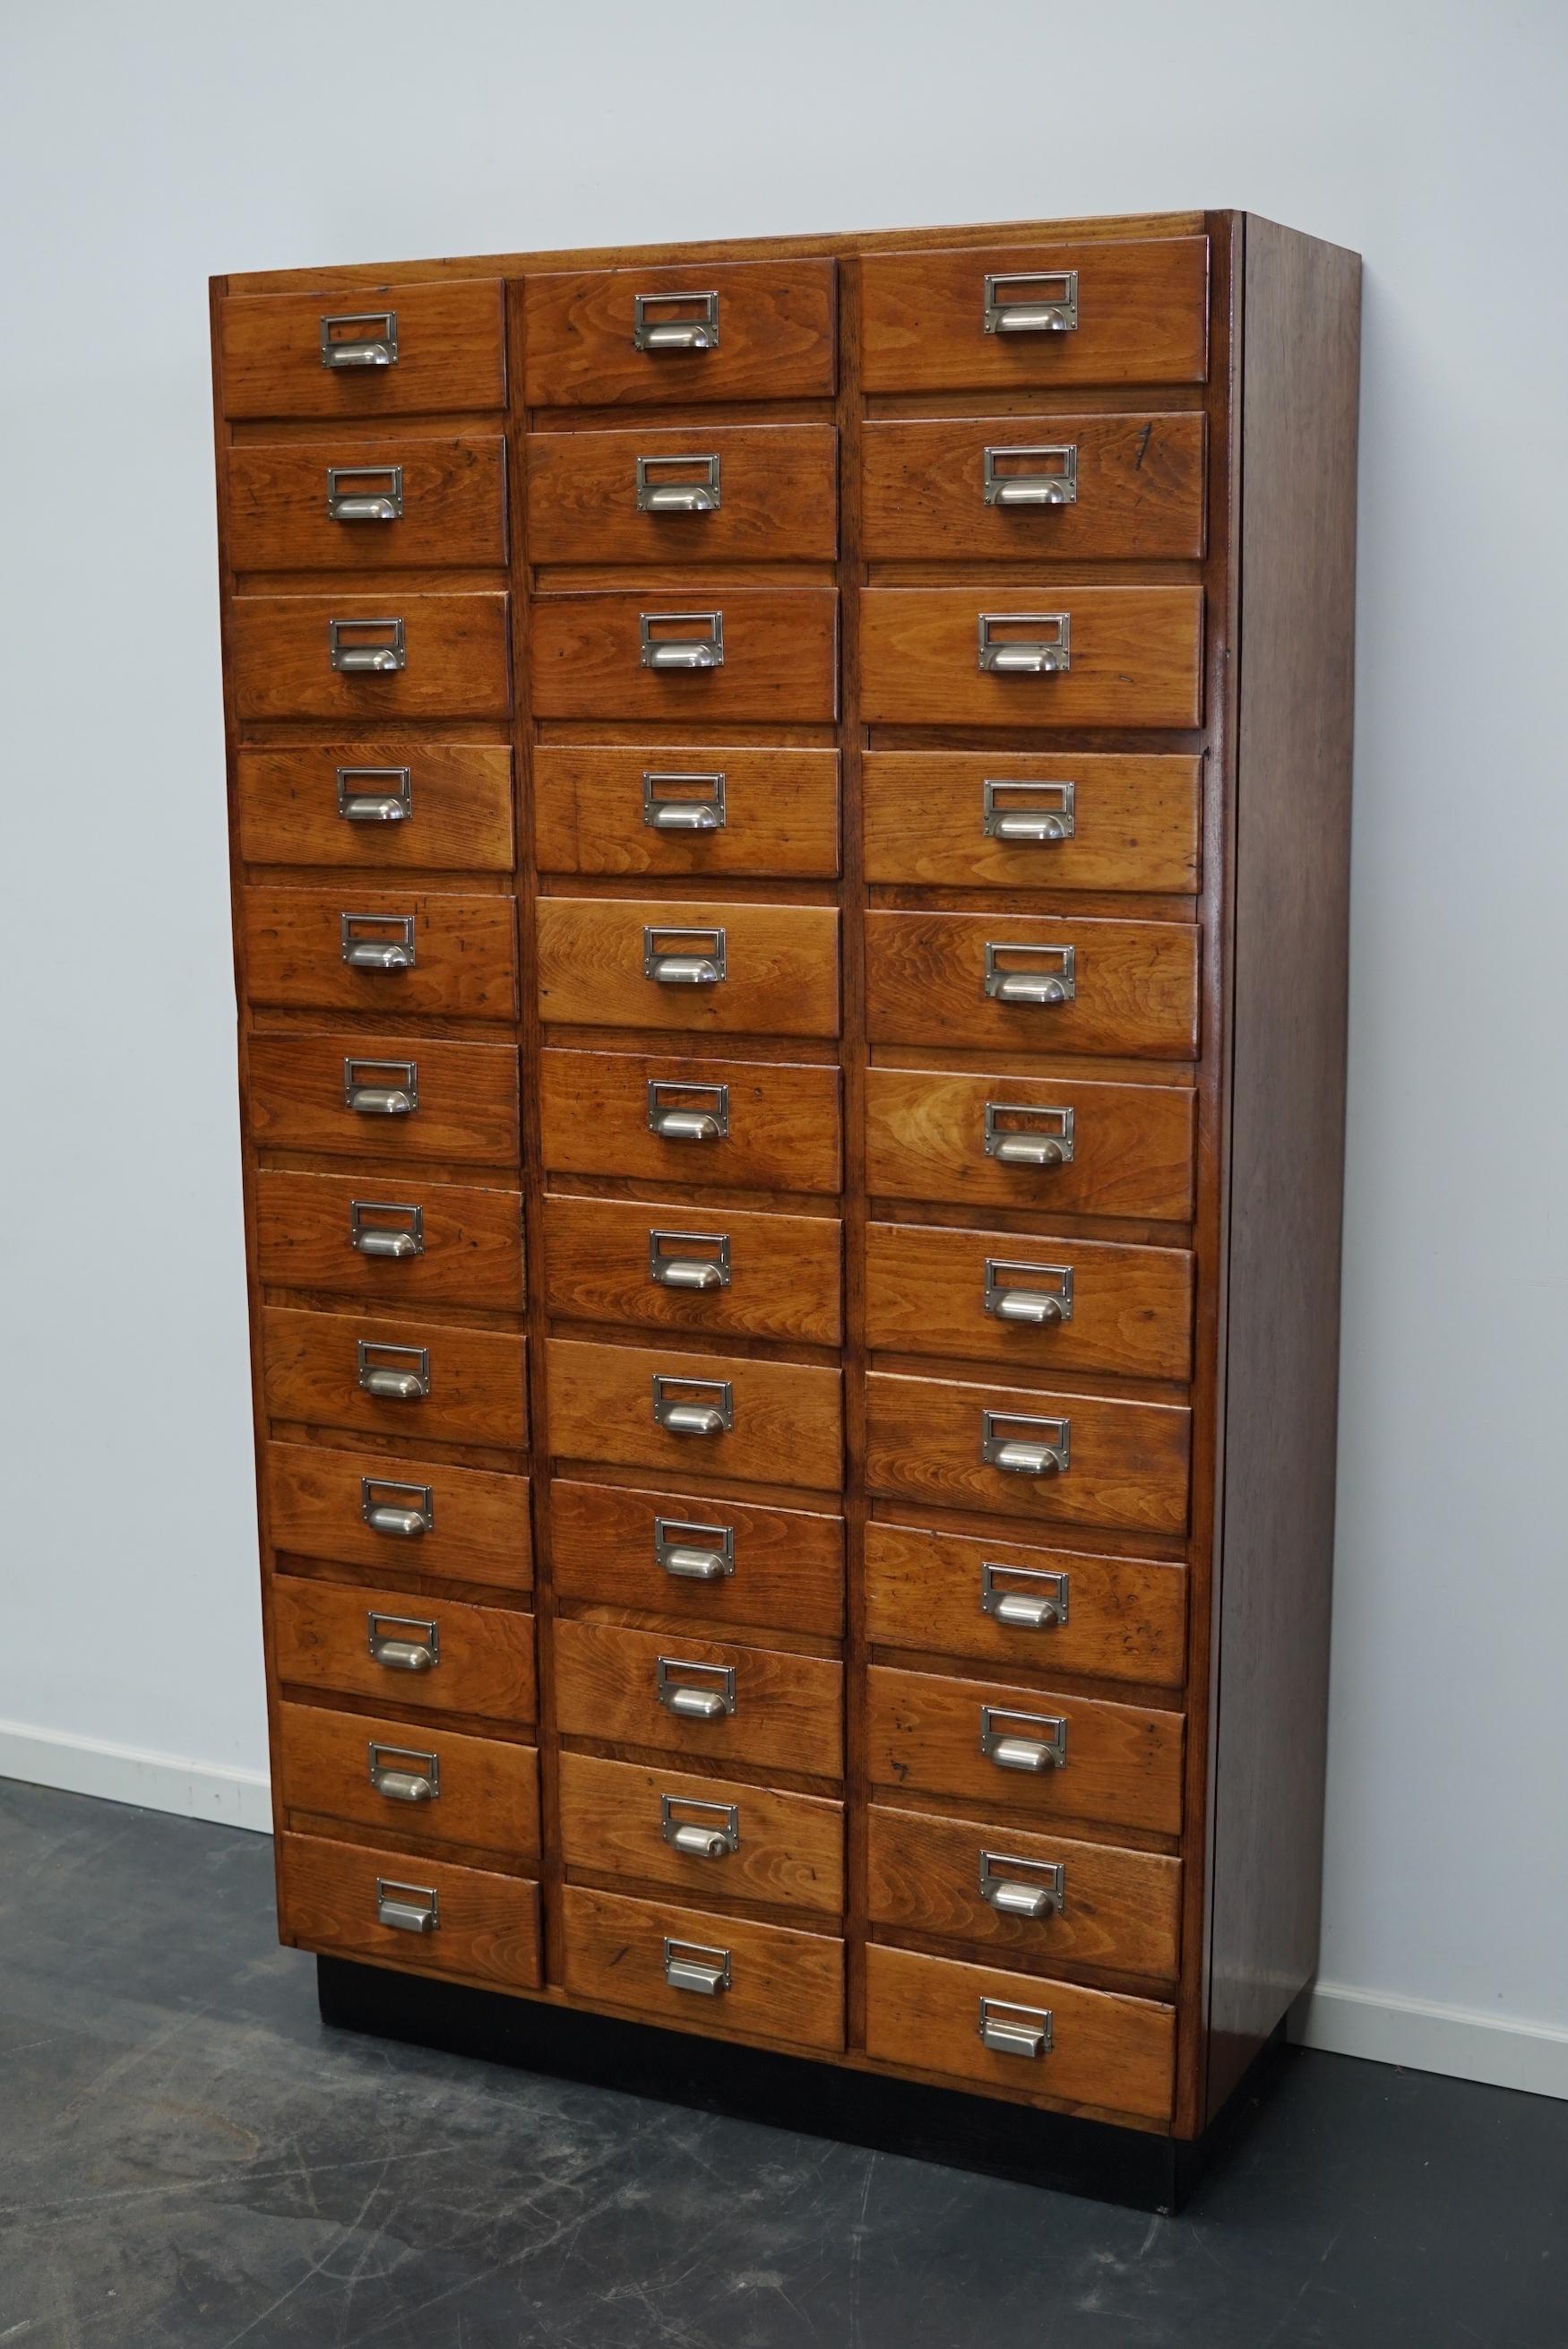 This apothecary cabinet was designed and made from beech circa 1950 in the Netherlands. It features 36 drawers with metal hardware. The inside of the drawers measure: DWH 36 x 26.5 x 9.5 cm.